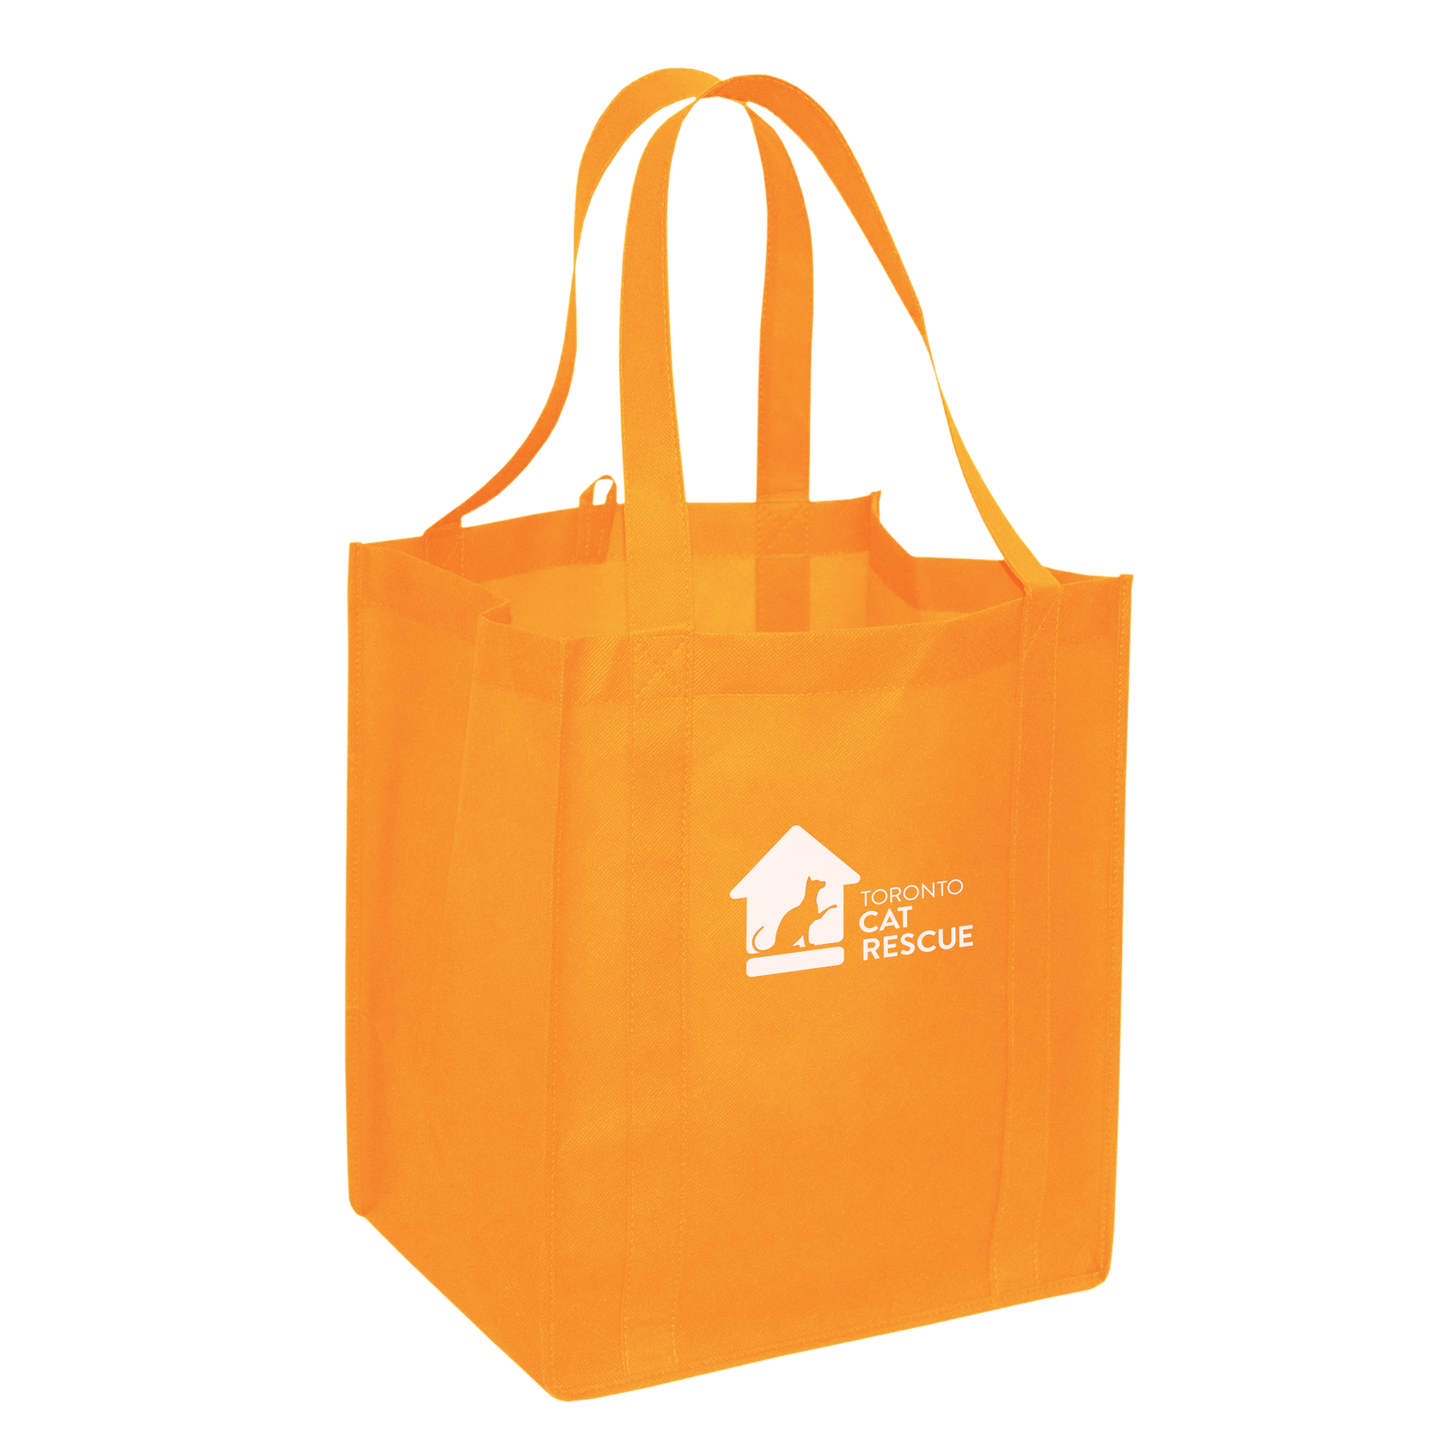 Every Day is Caturday Tote in Orange